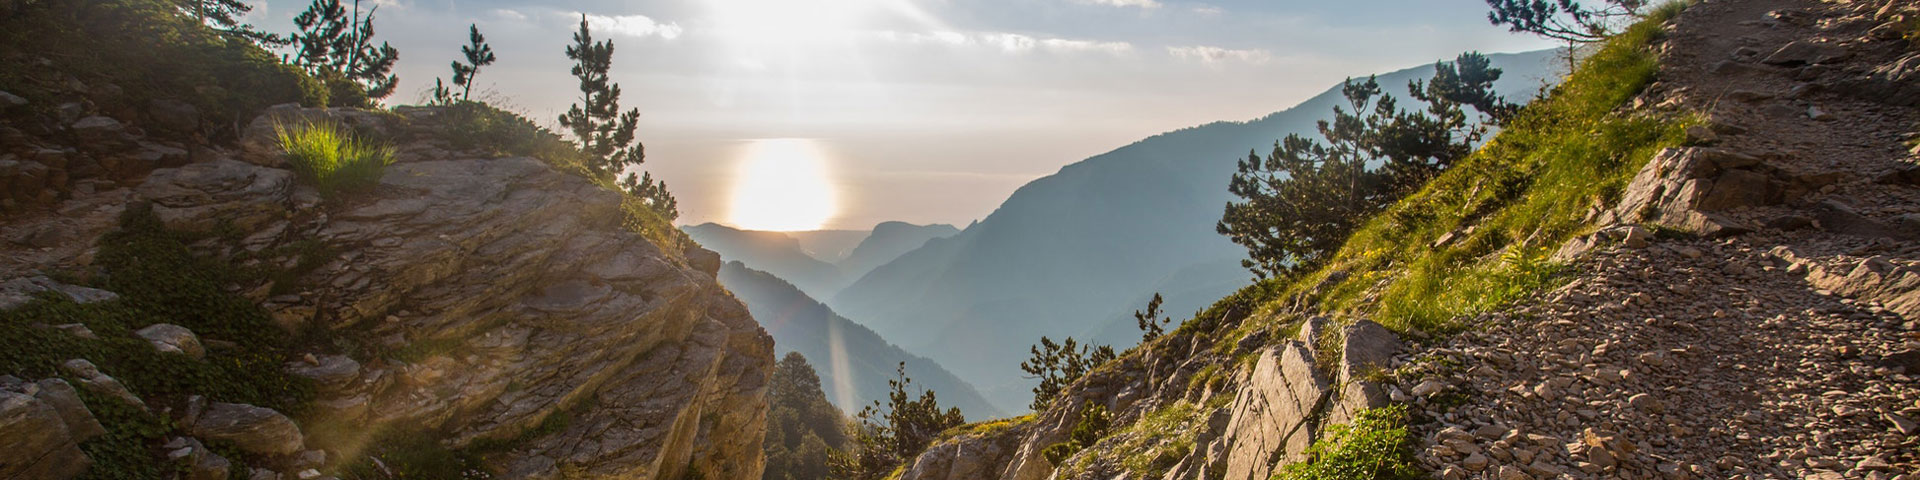 Panoramic view from guided climb to Mount Olympus, Greece